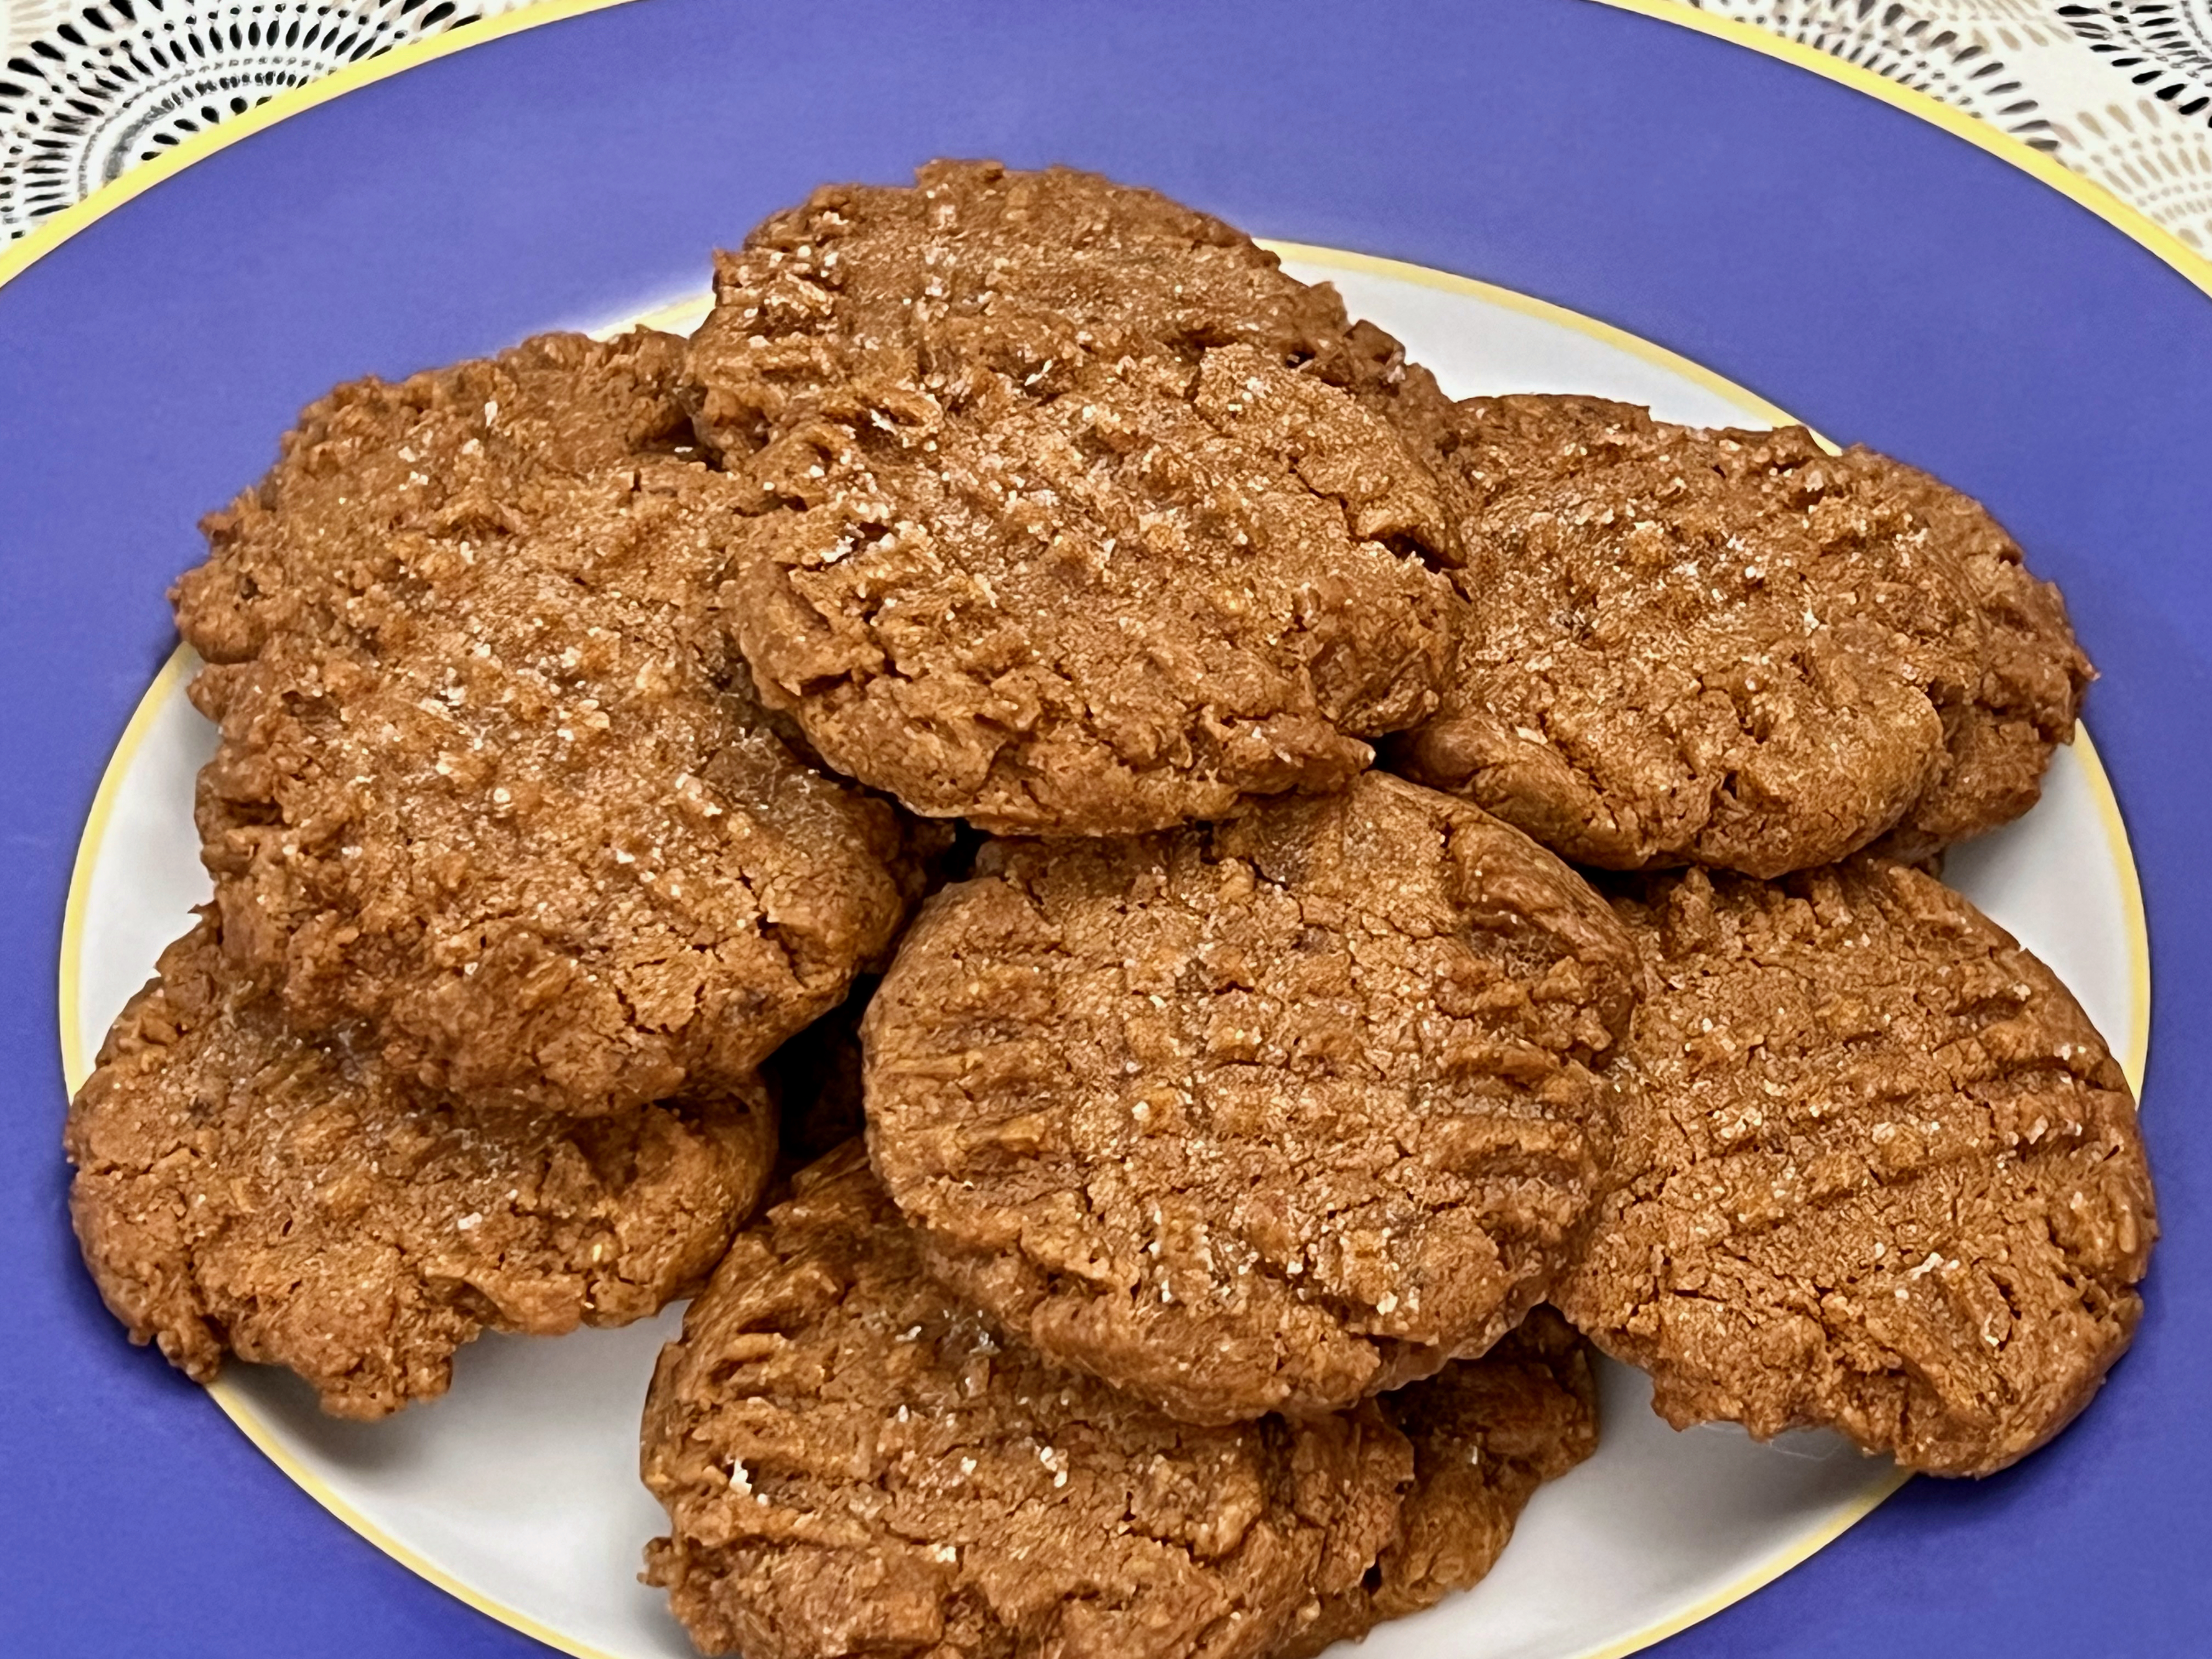 Cross-hatched peanut butter cookies with a reddish hue, lightly covered in sugar crystals.